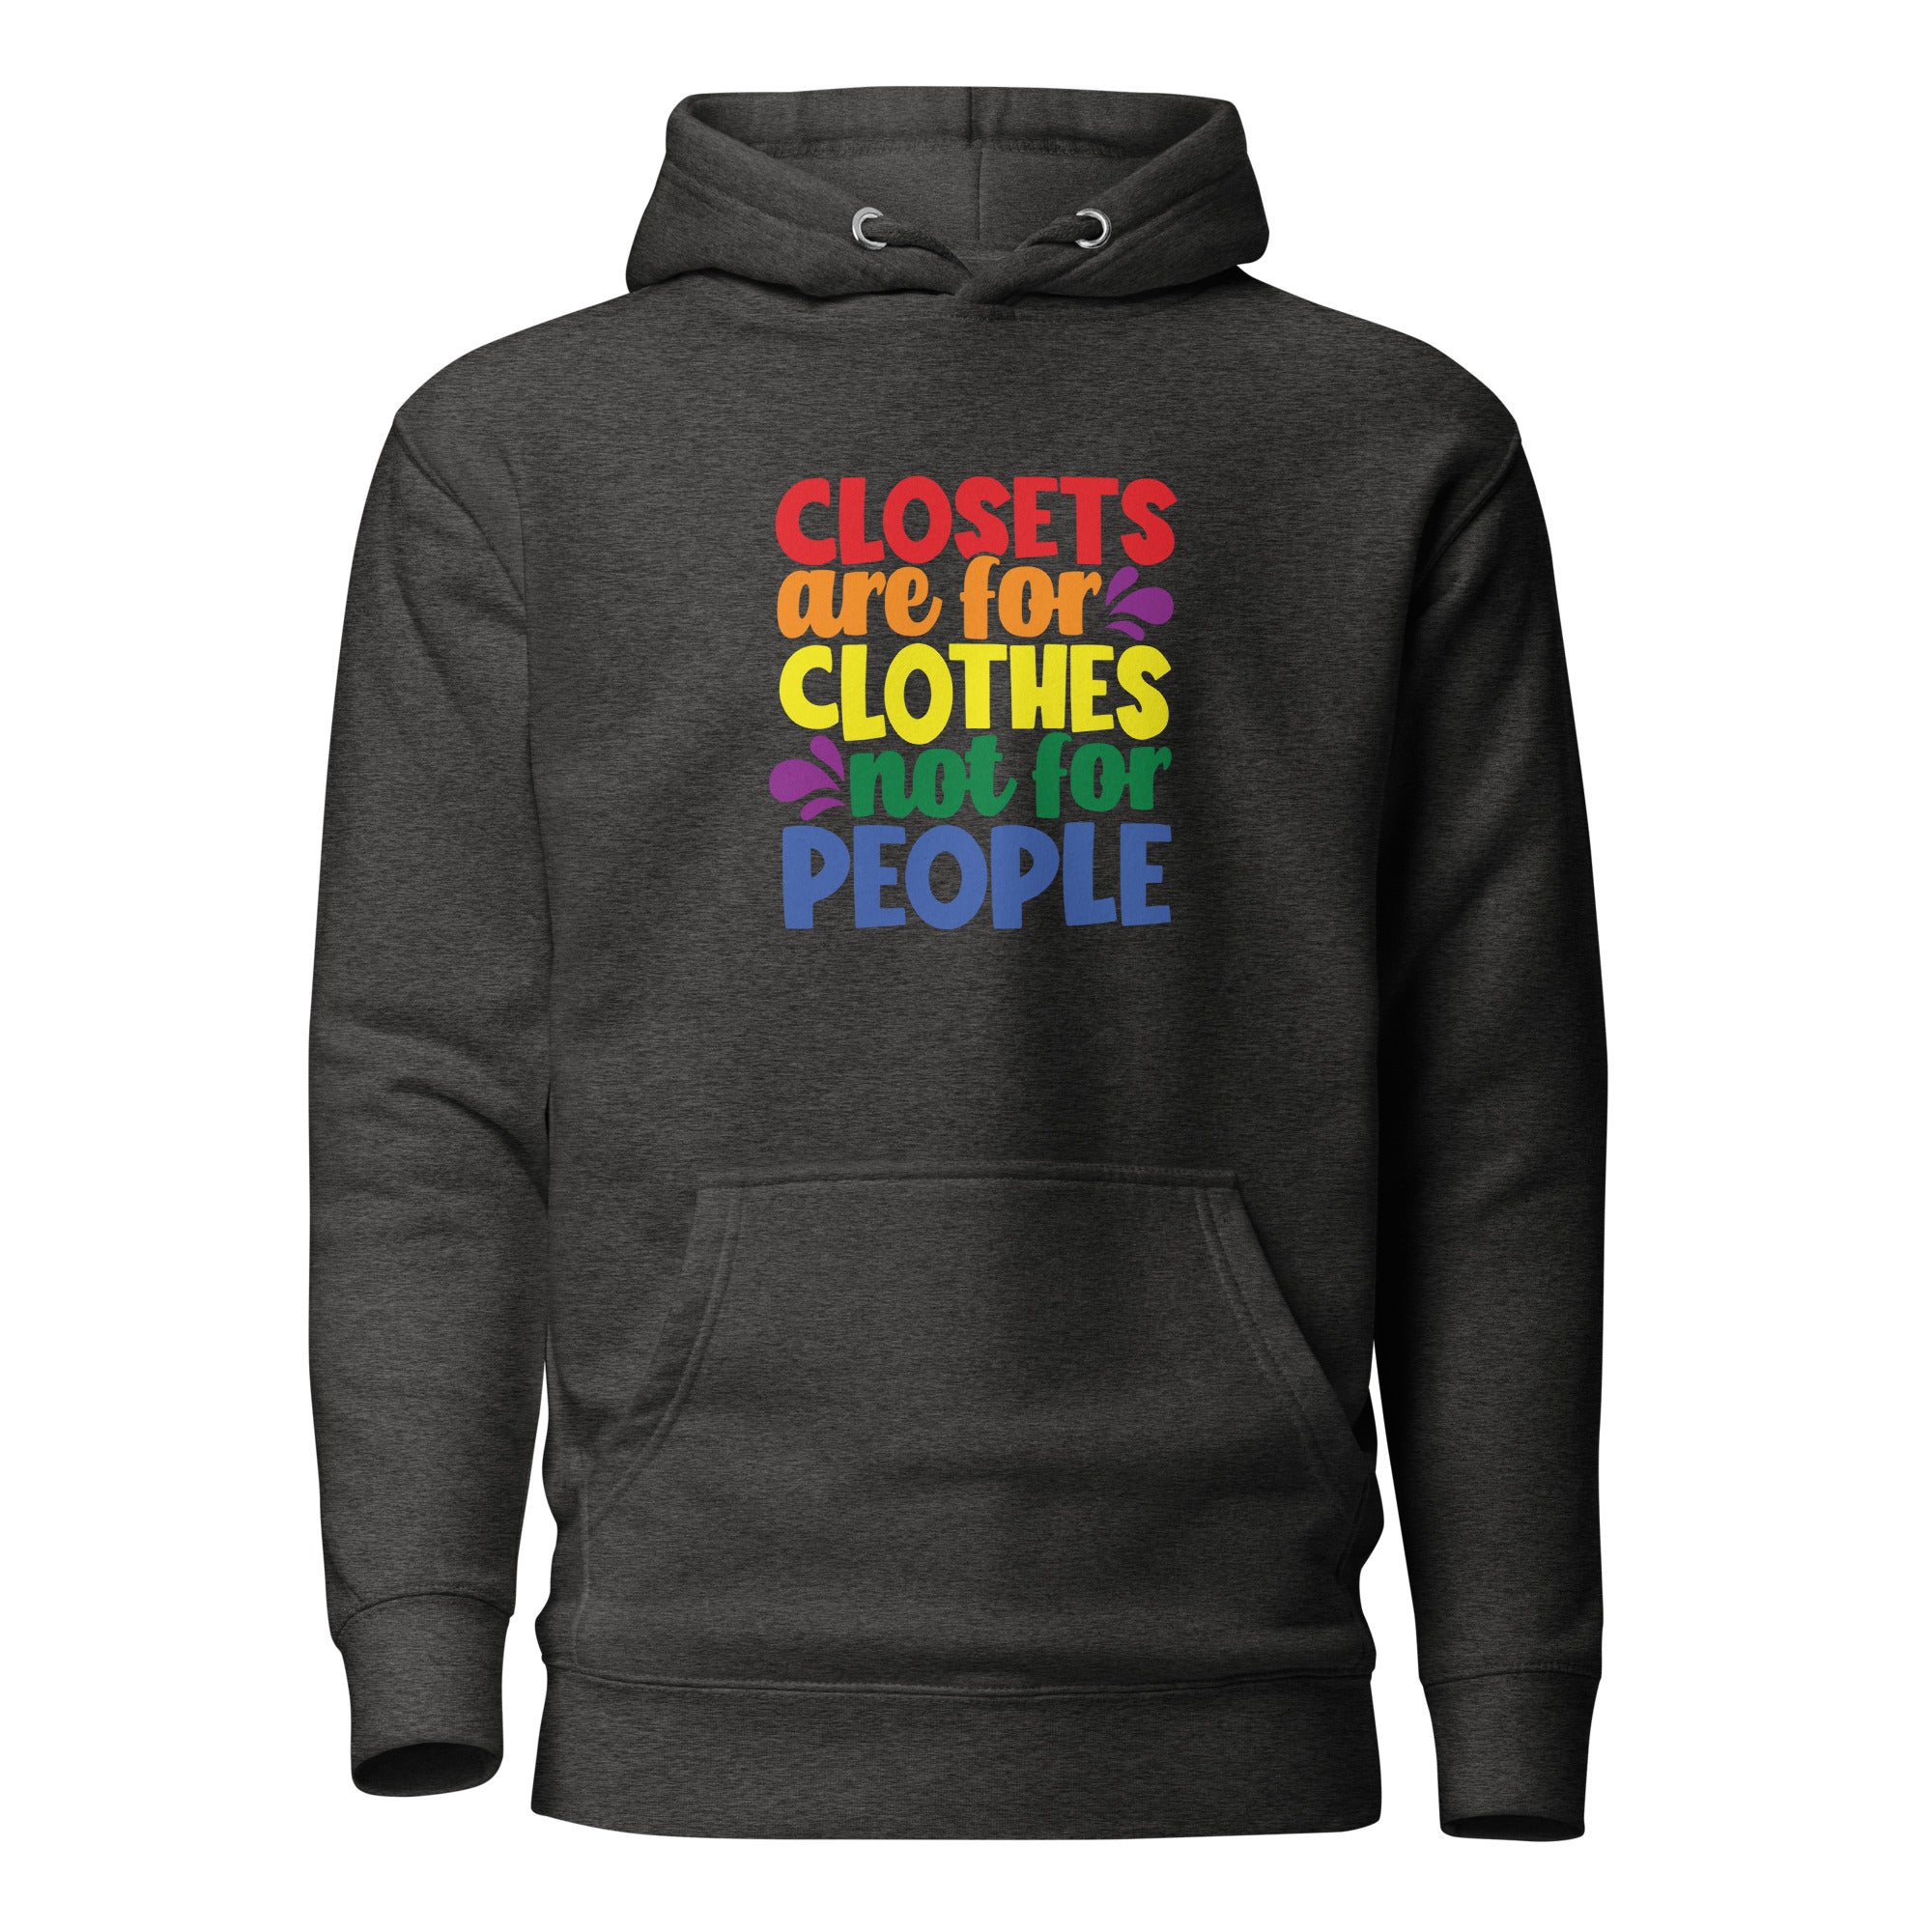 Unisex Hoodie- Closets are for clothes not for people